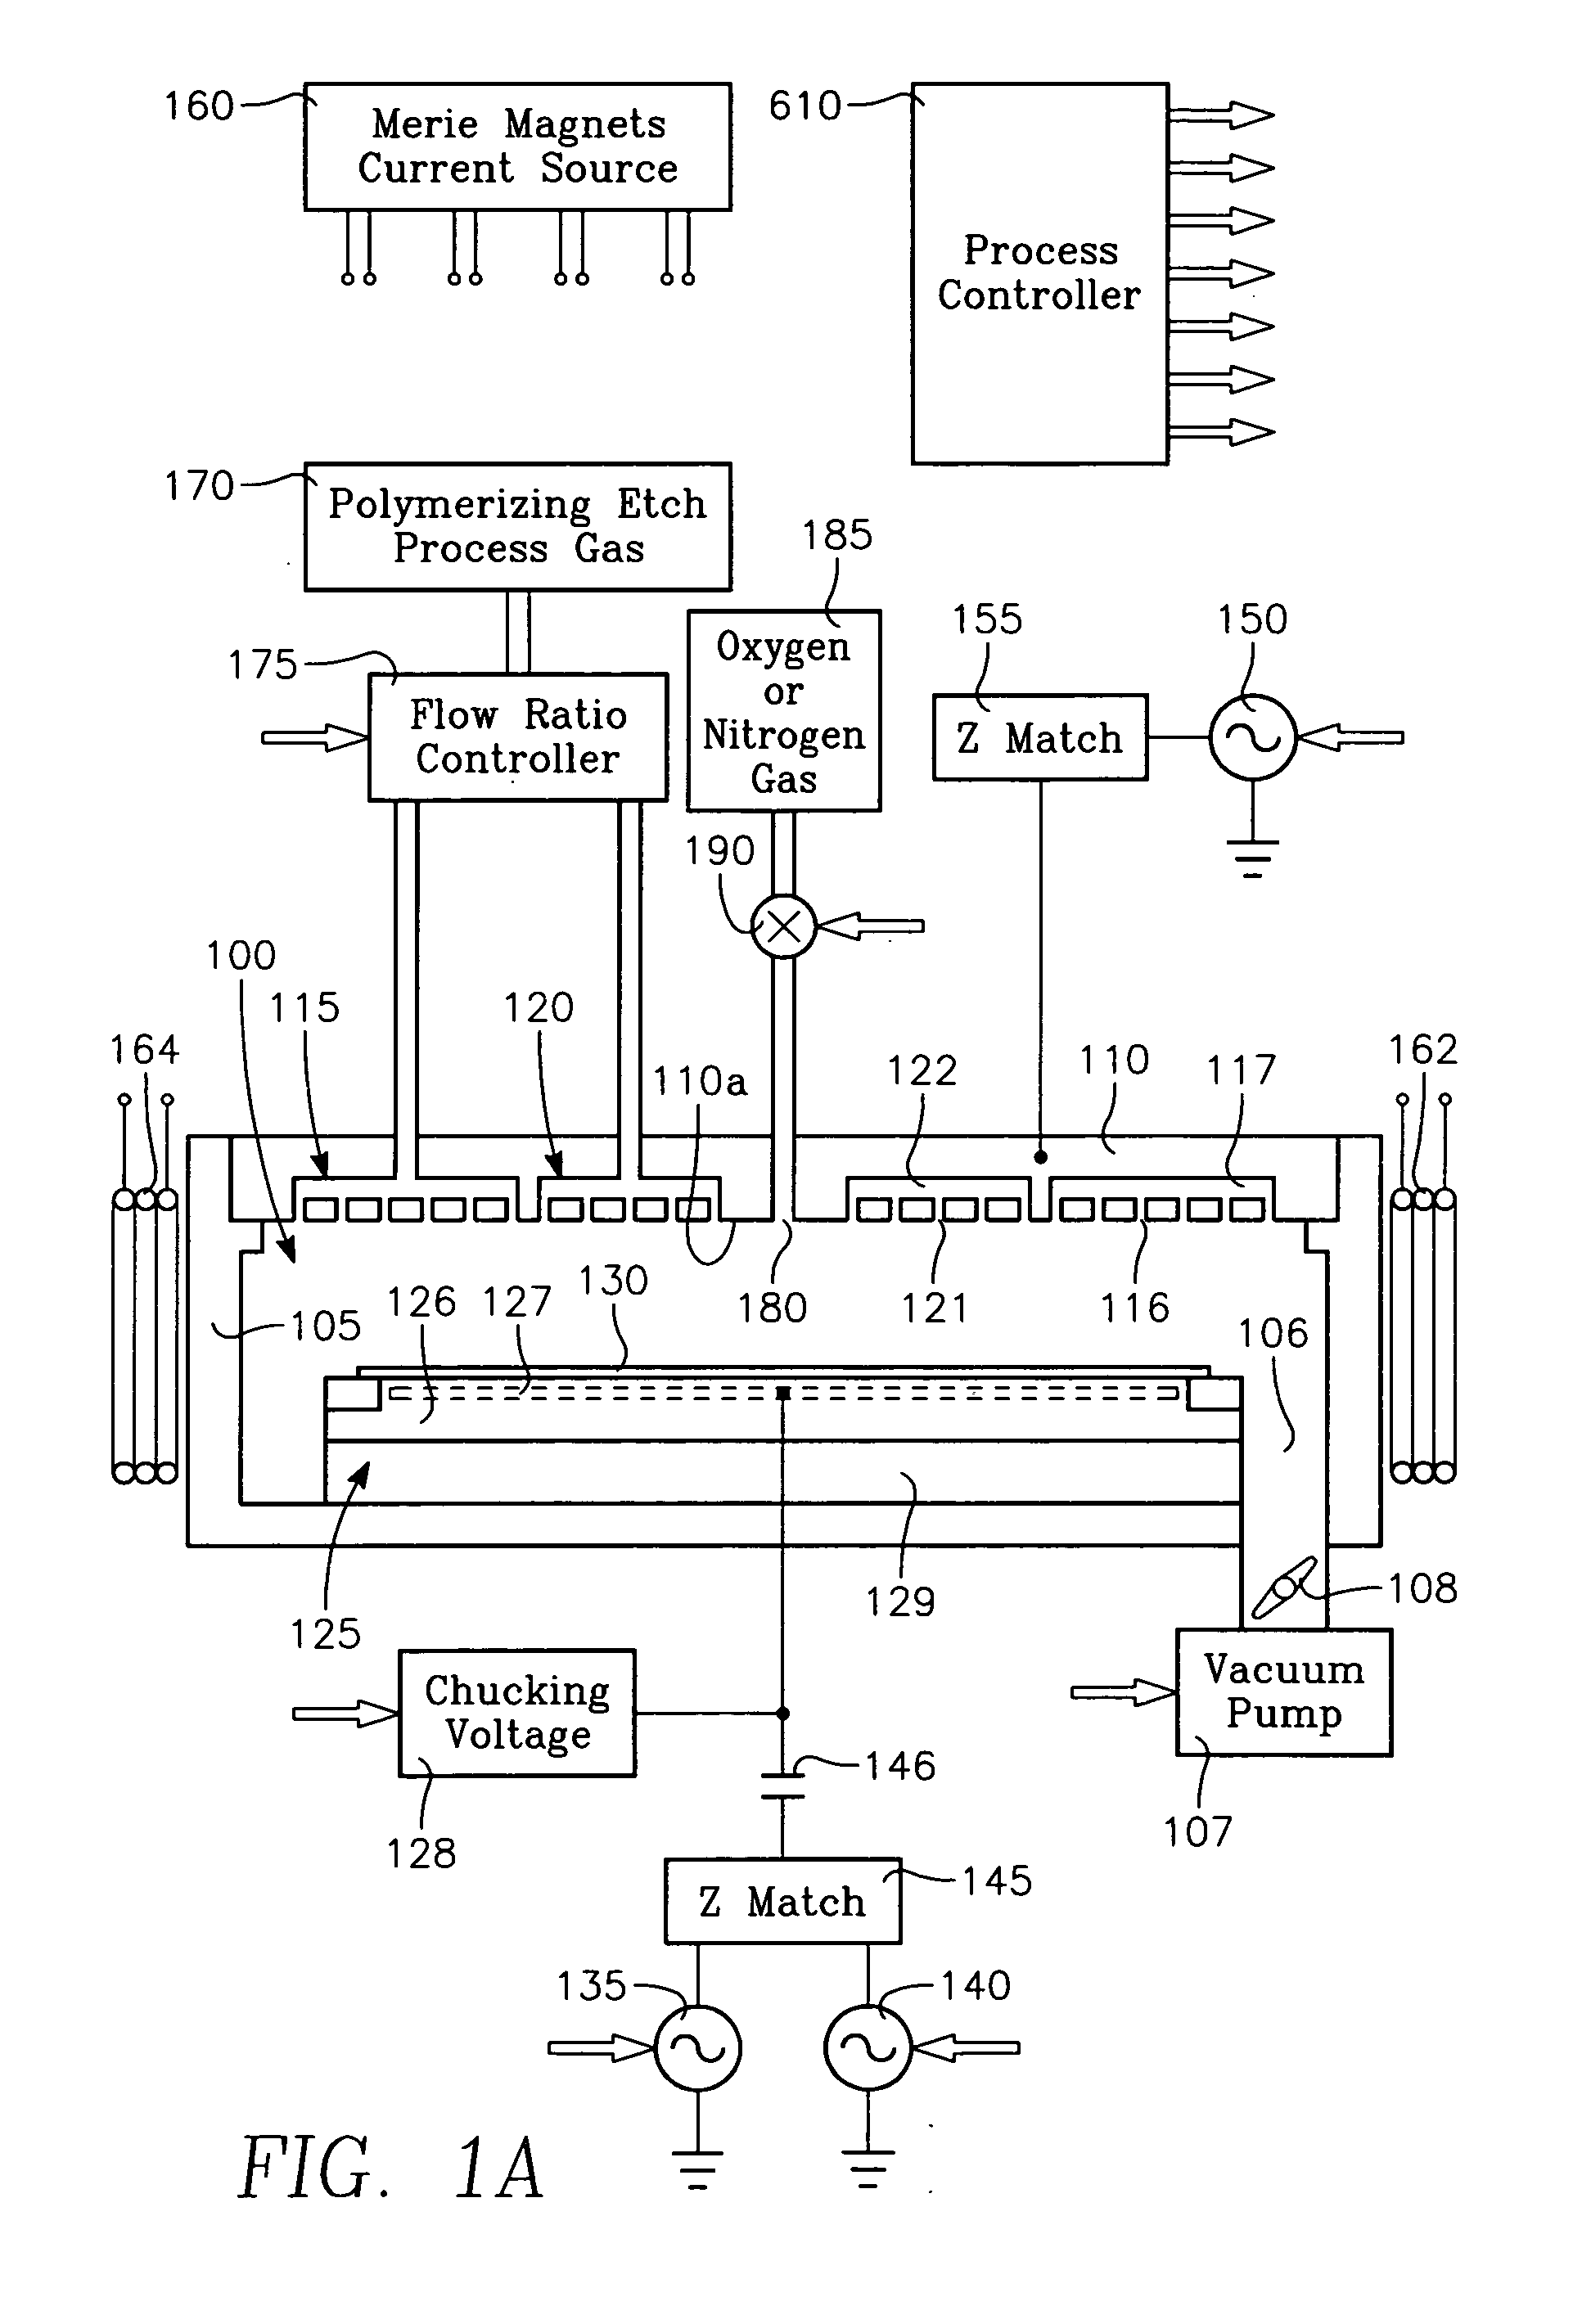 Plasma etch process using polymerizing etch gases across a wafer surface and additional polymer managing or controlling gases in independently fed gas zones with time and spatial modulation of gas content